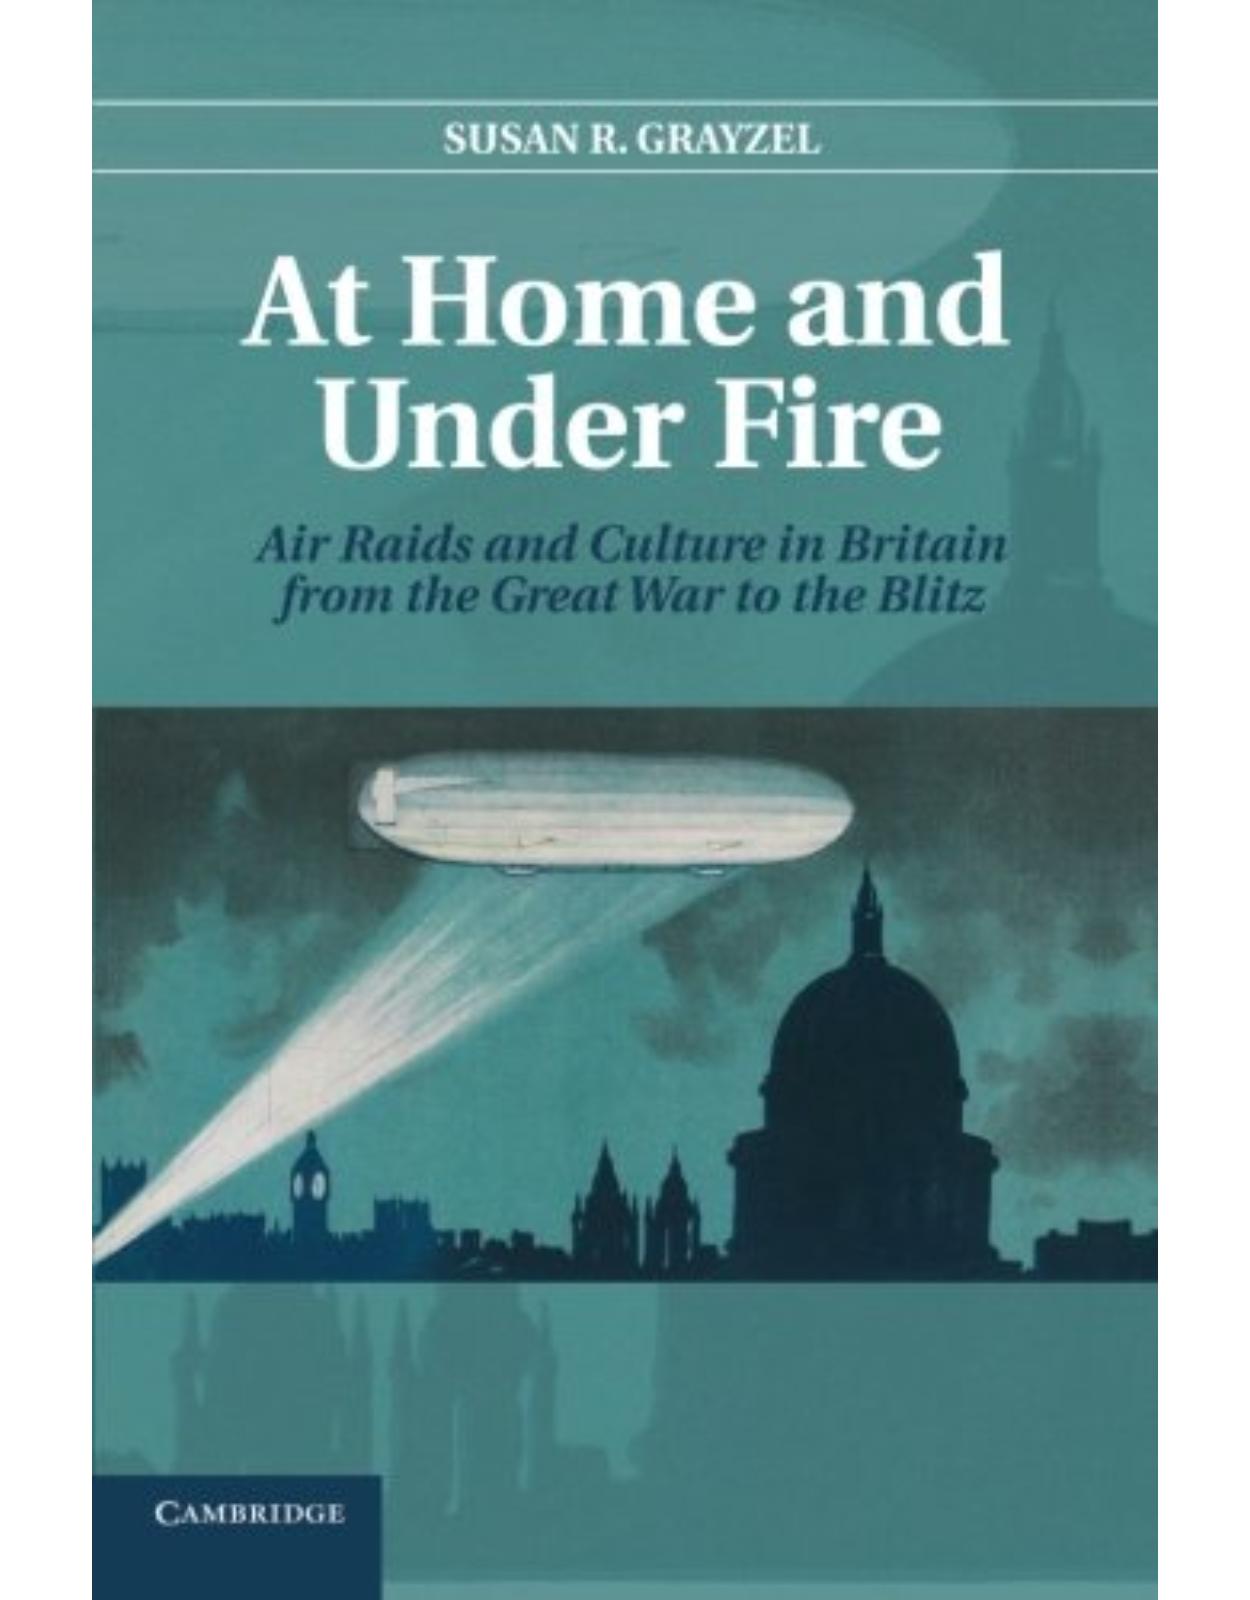 At Home and under Fire: Air Raids and Culture in Britain from the Great War to the Blitz